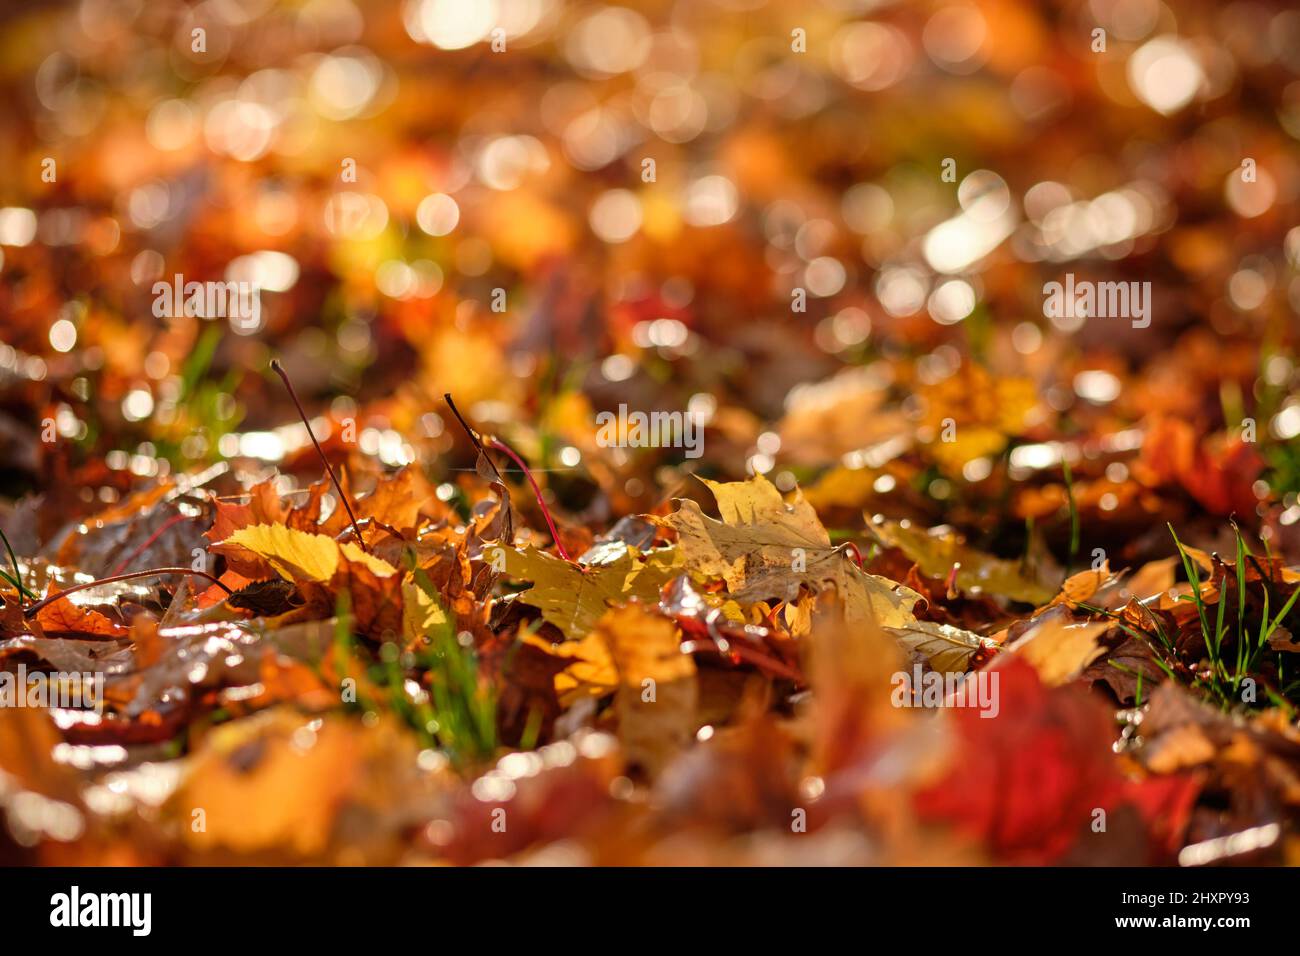 Close-up of beautiful colored autumn leaves lying on the ground in the sunlight. Seen in Germany in October. Stock Photo